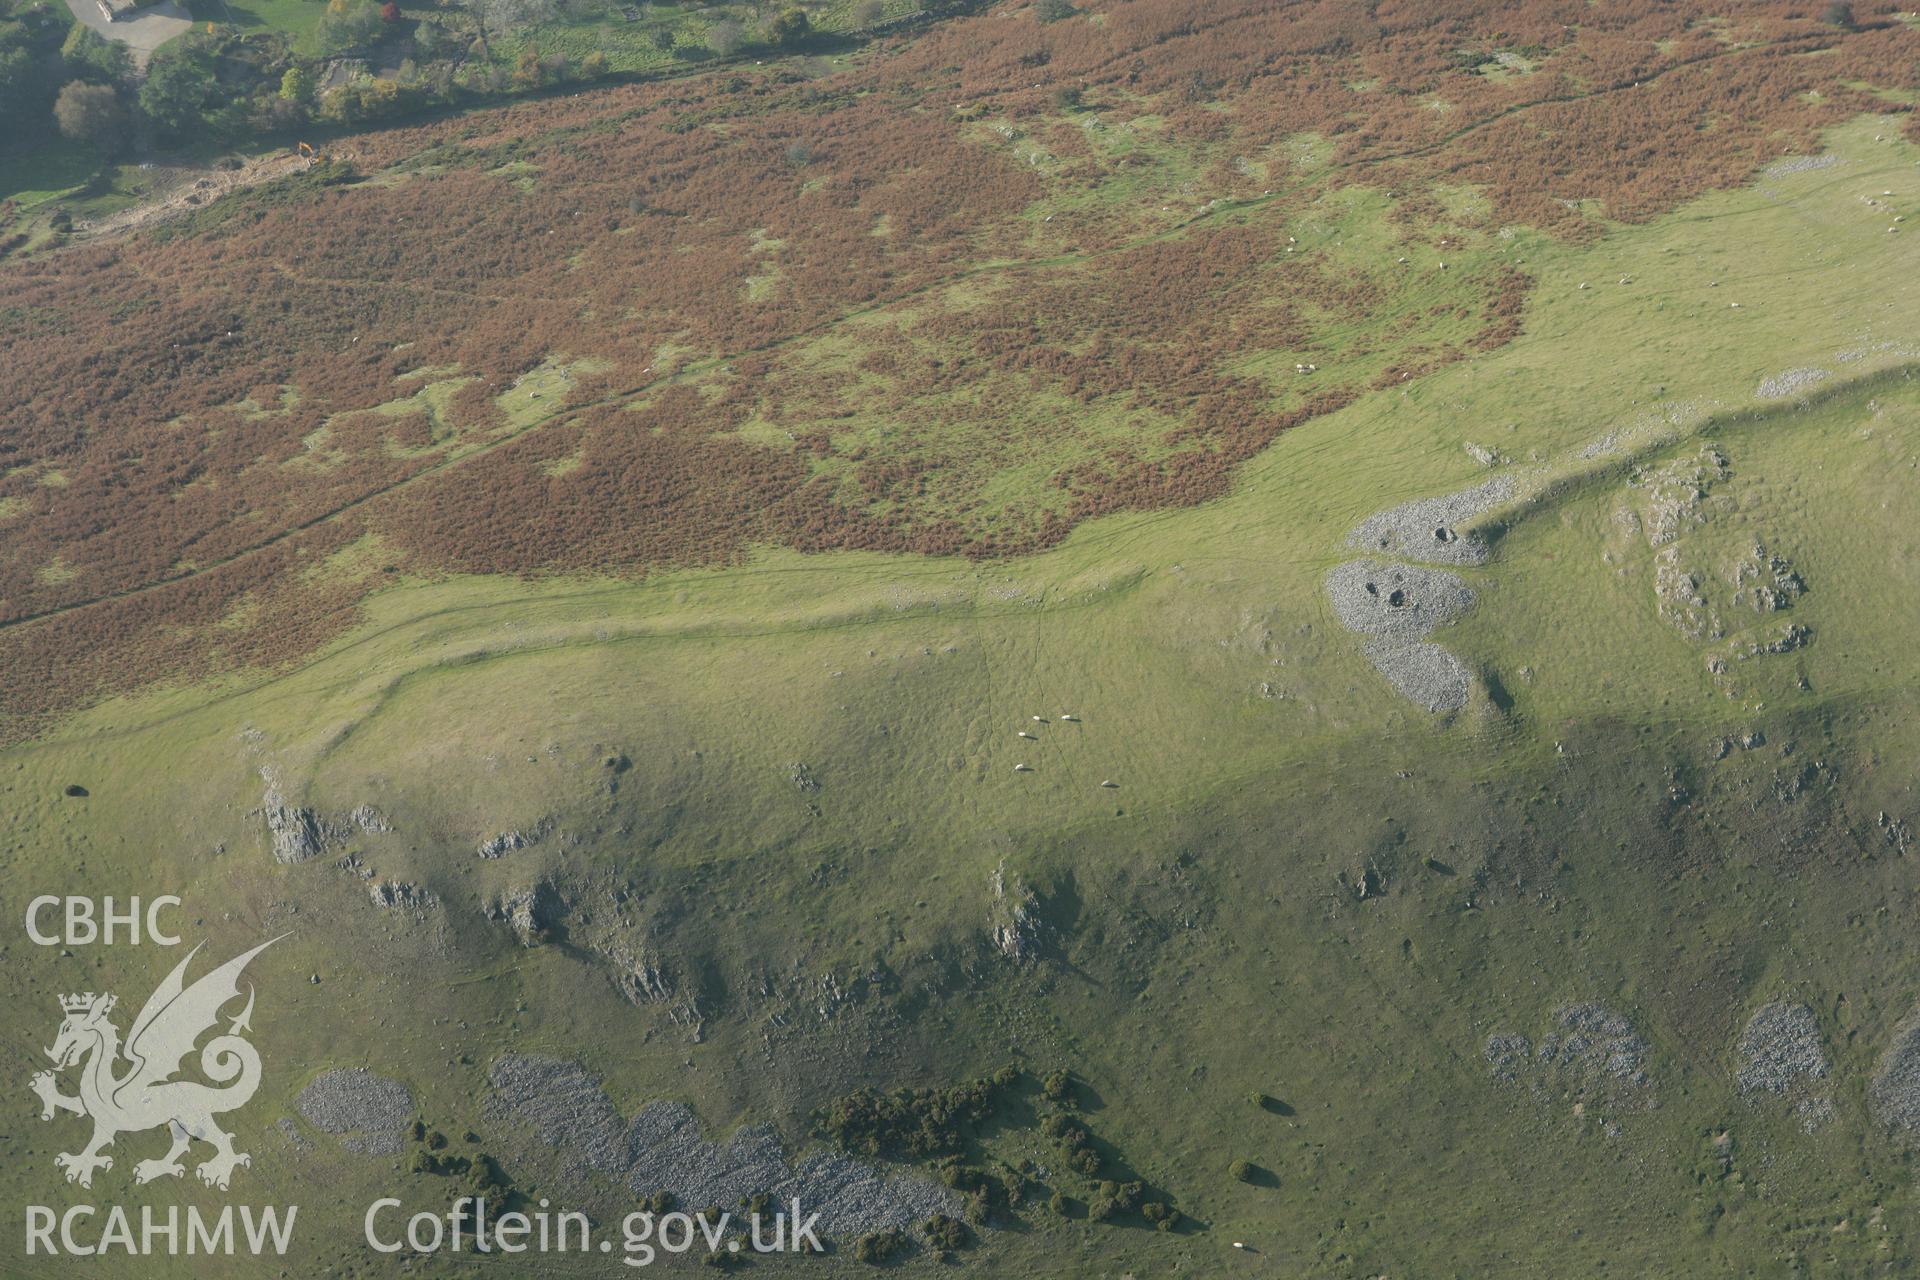 RCAHMW colour oblique photograph of Castle Bank Hillfort. Taken by Toby Driver on 13/10/2010.